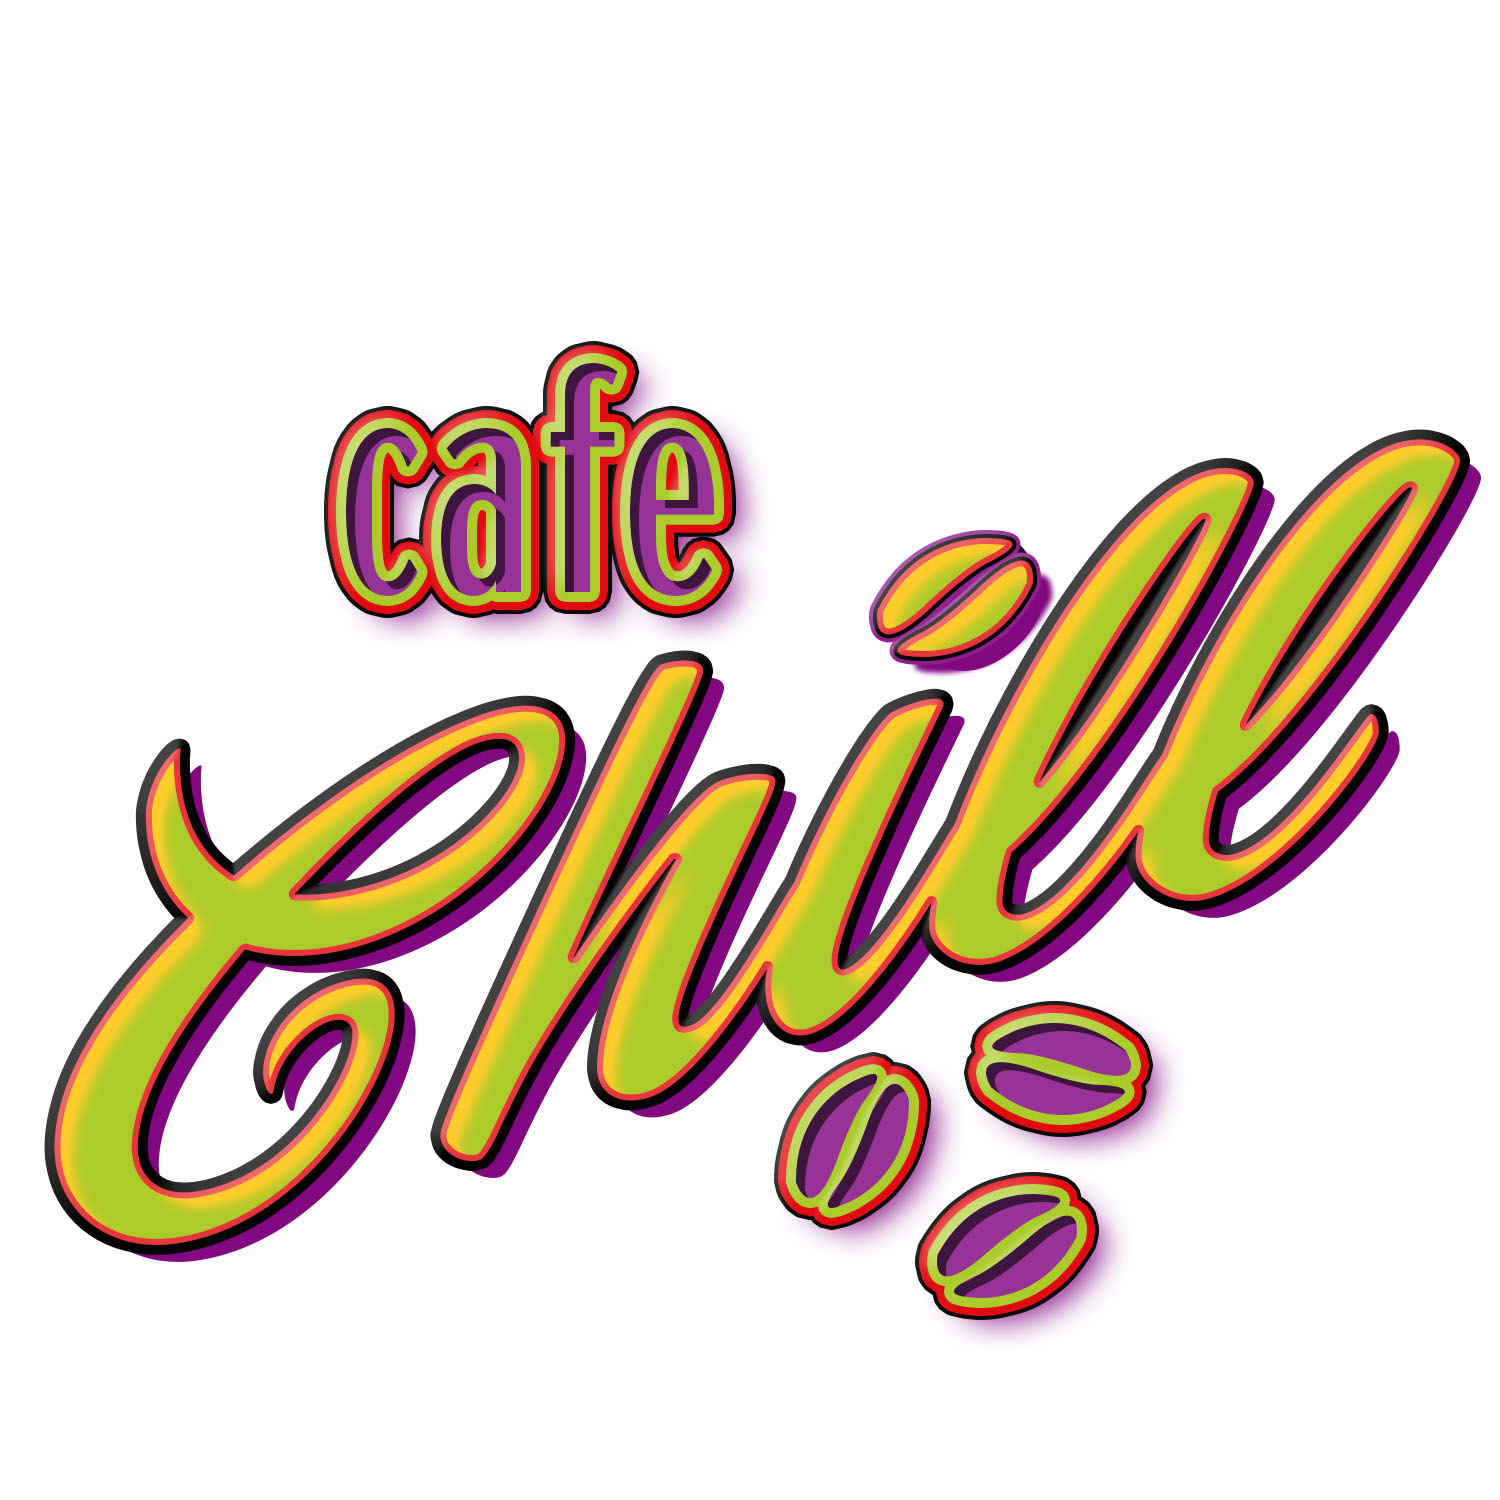 Chill out logo Royalty Free Vector Image - VectorStock